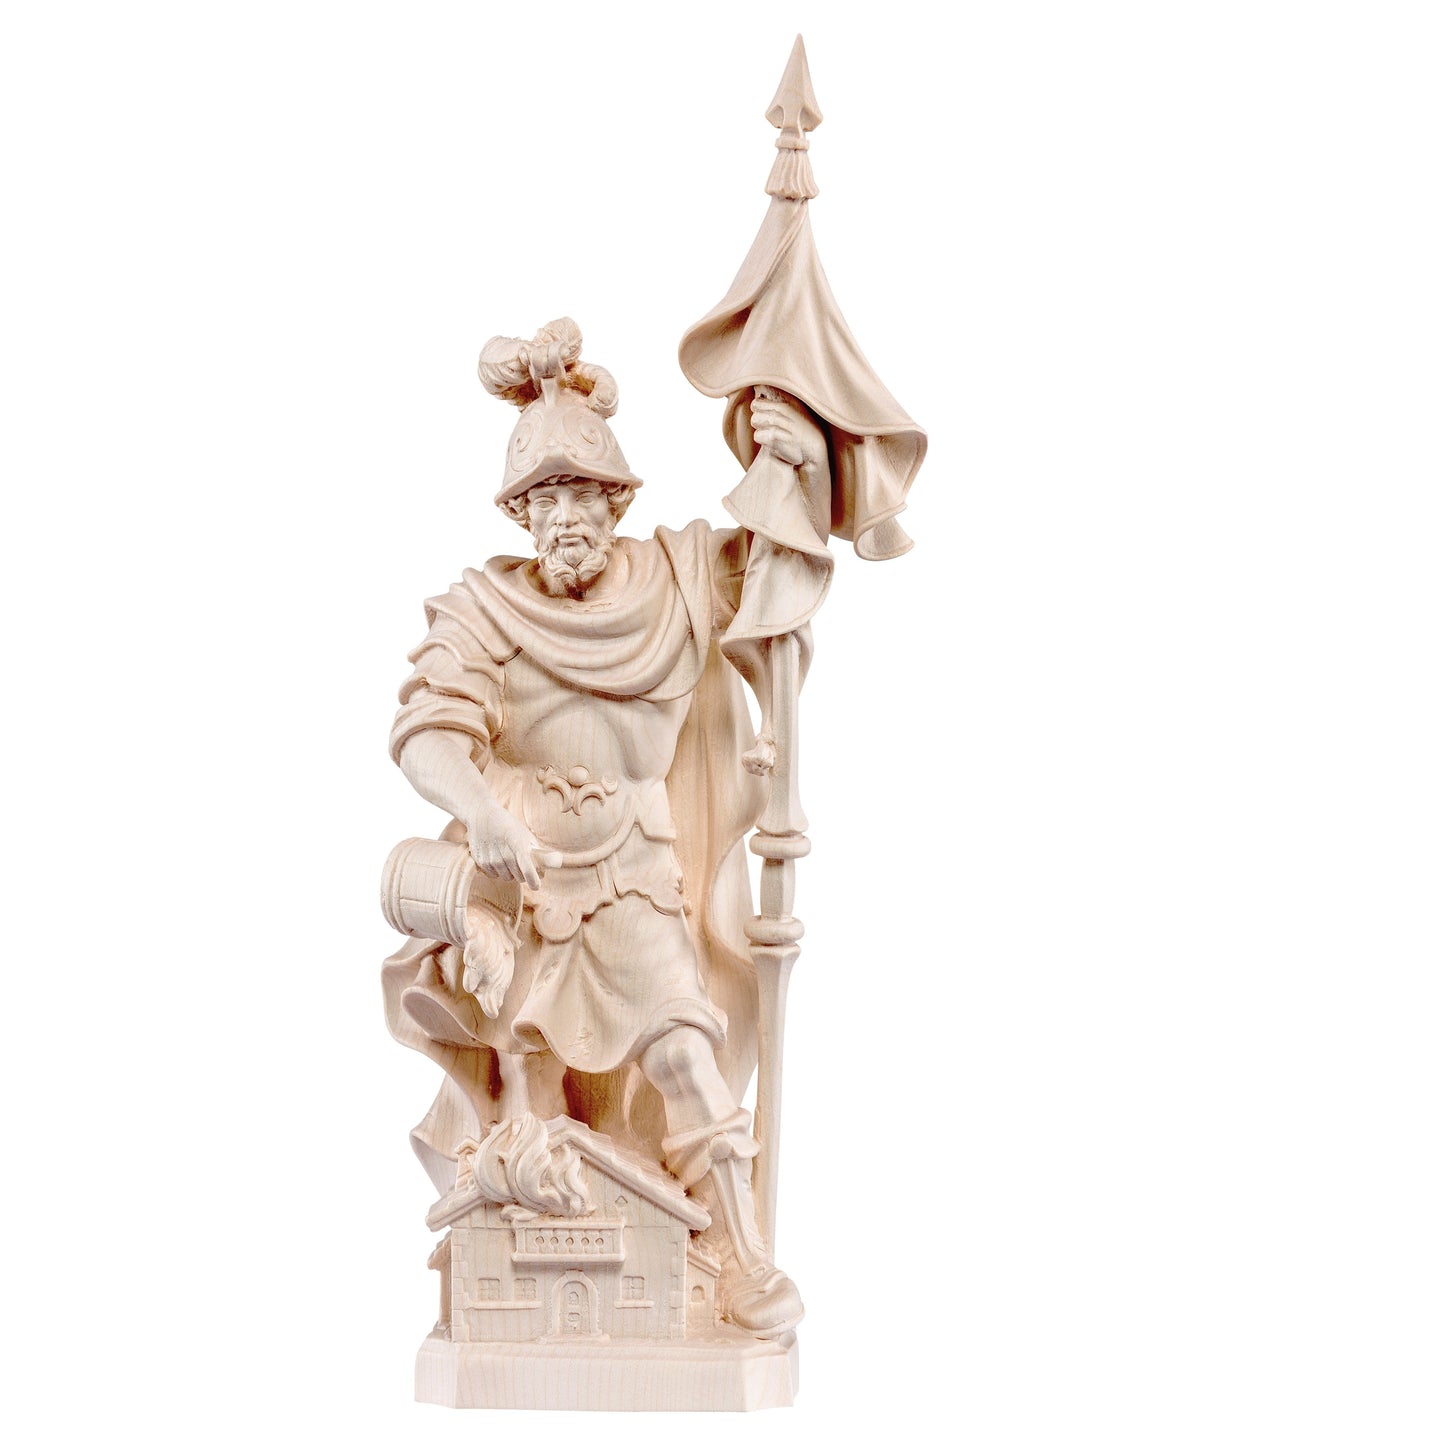 MONDO CATTOLICO Natural / 16 cm (6.3 in) Wooden Statue of St. Florian